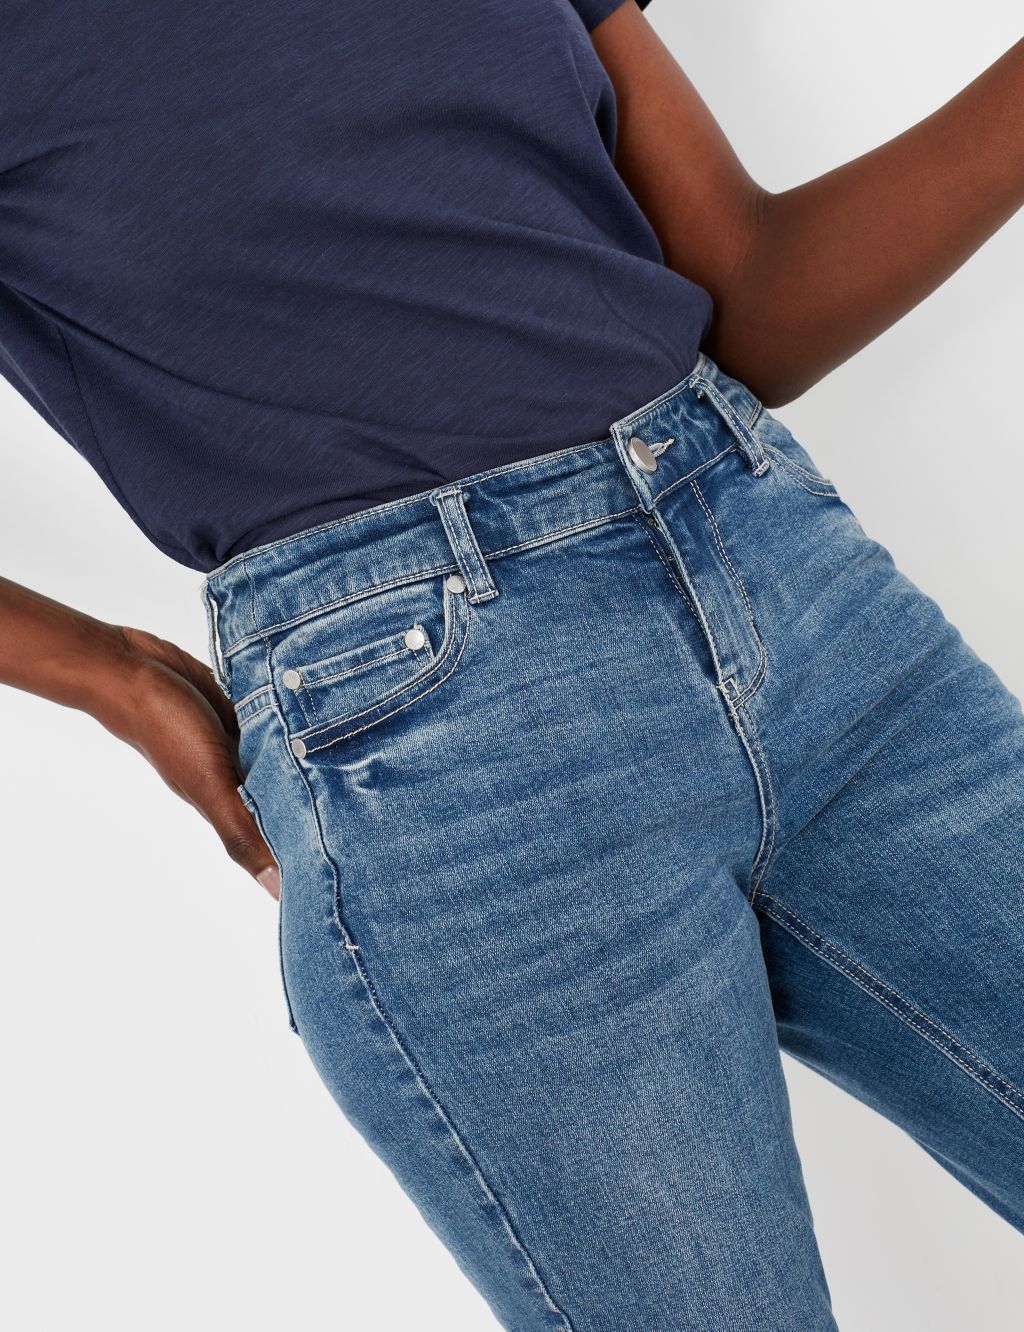 High Waisted Tapered Jeans image 3